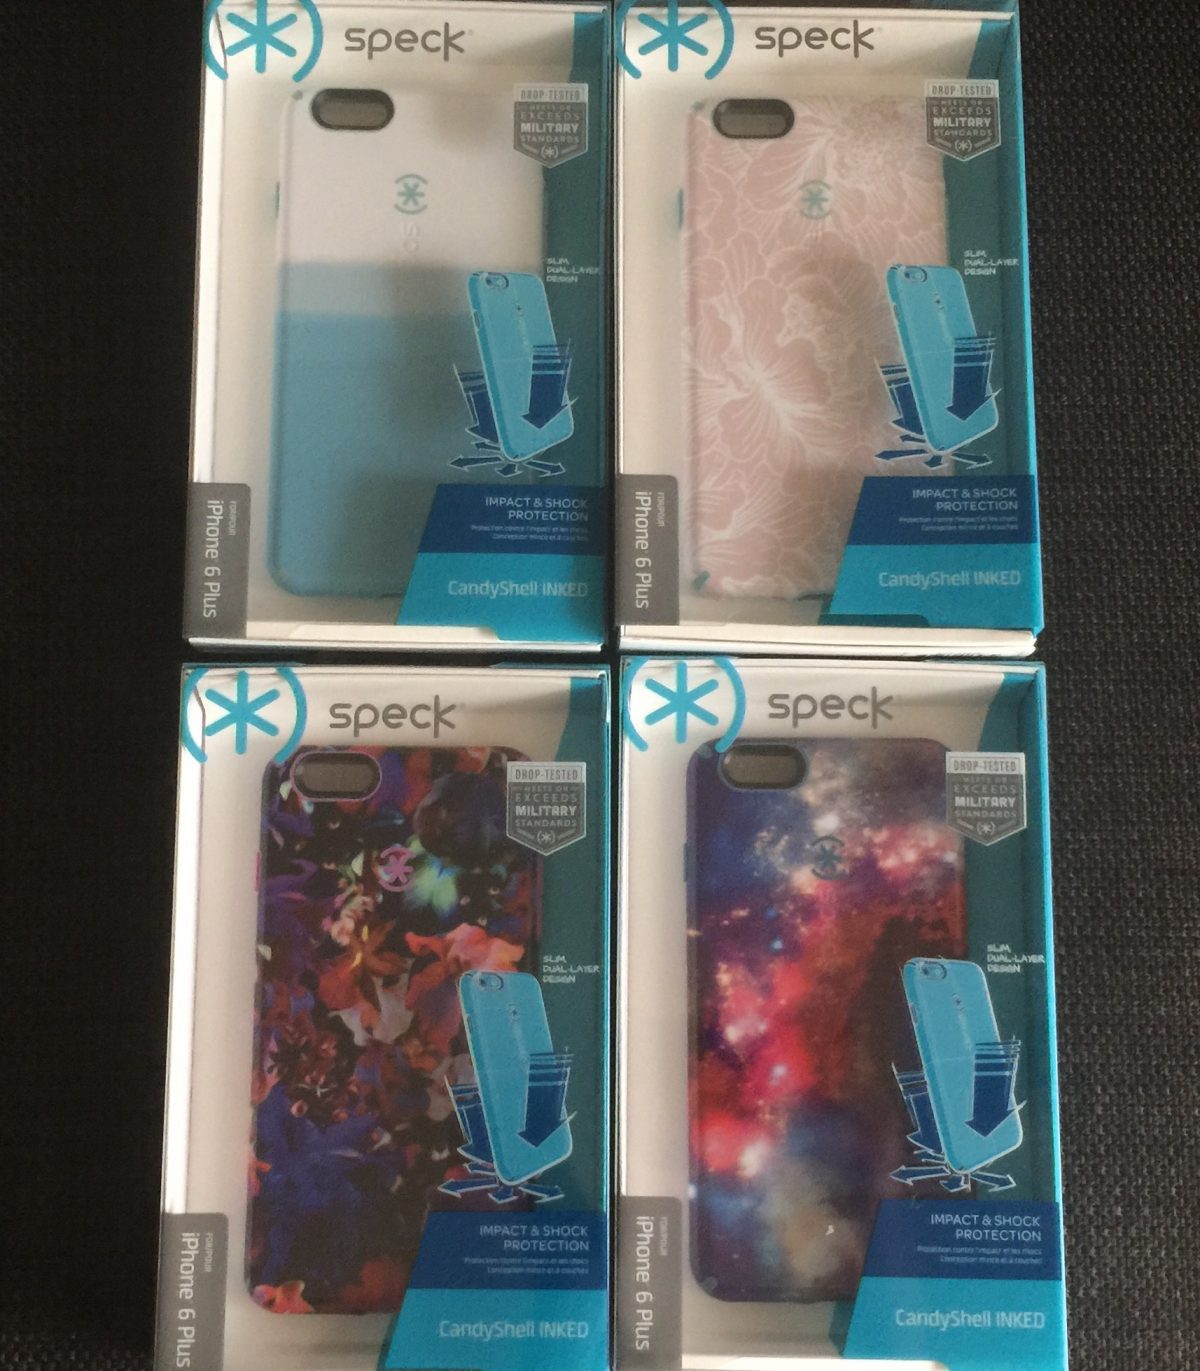 Speck CandyShell INKED for iPhone 6 Plus Burst with Color and Design- Giveaway